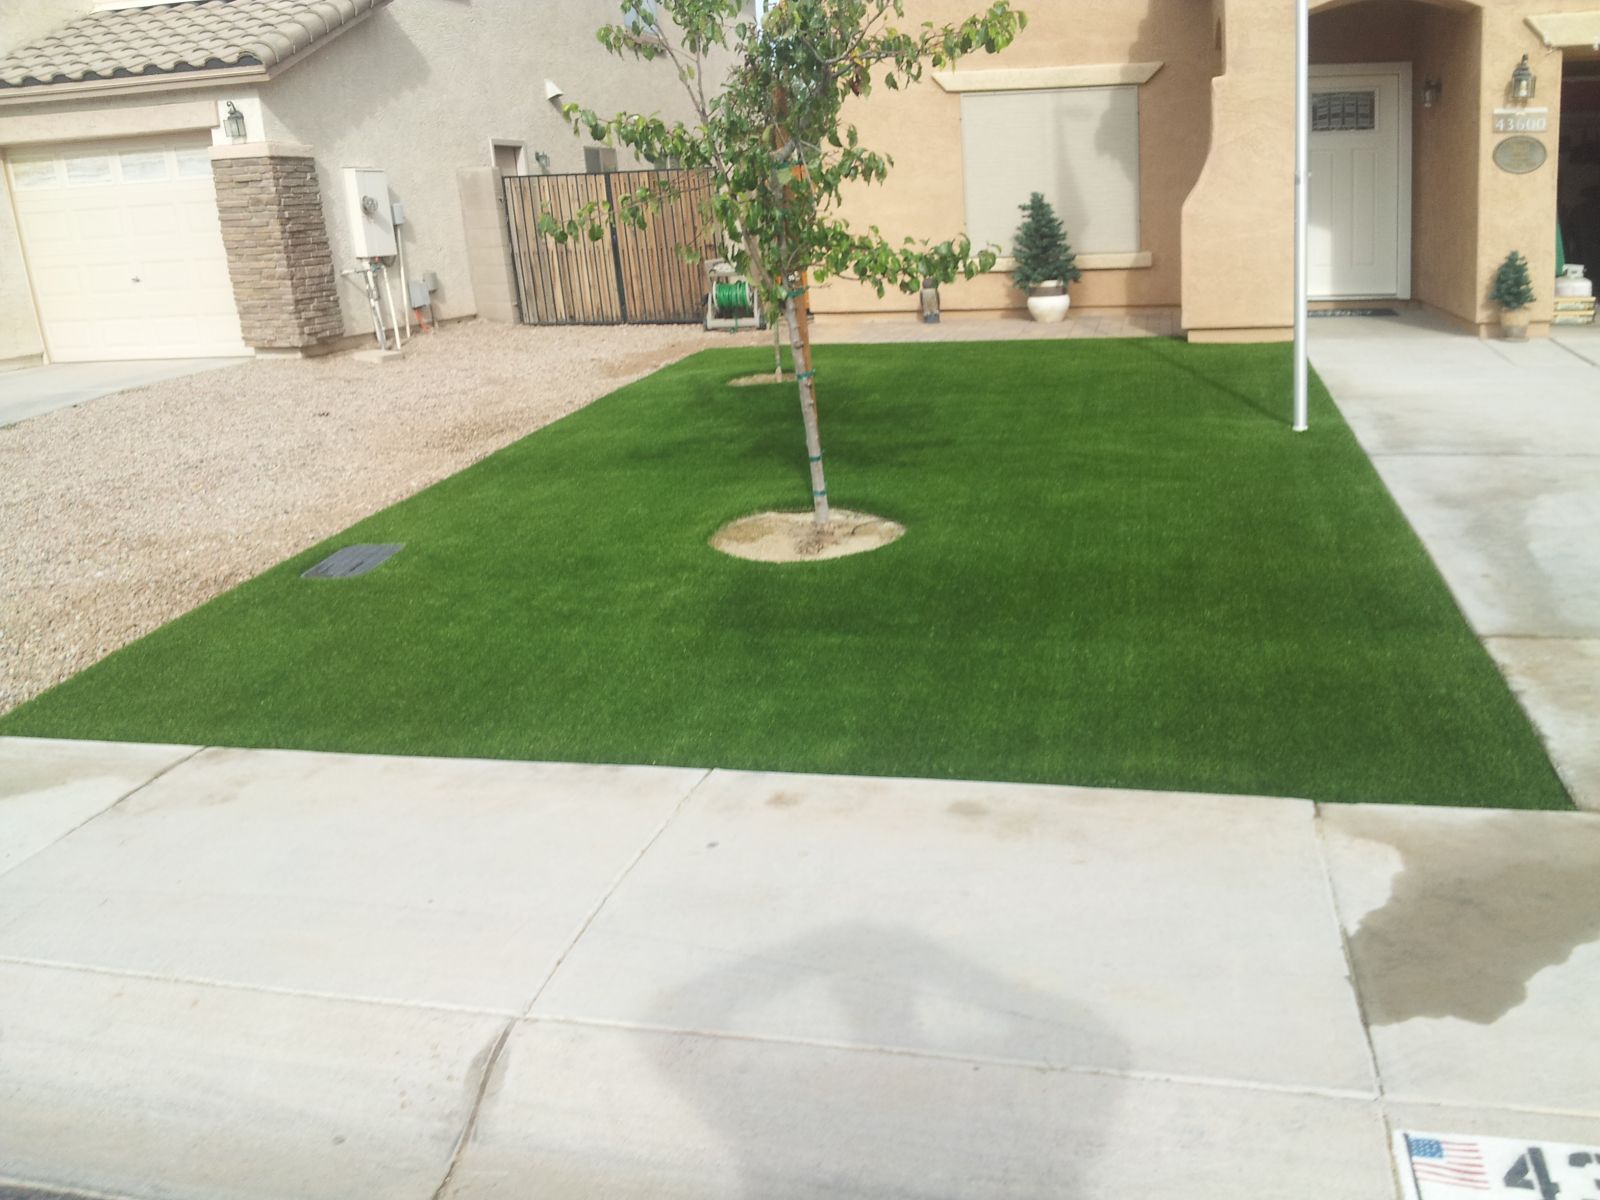 Experience the Luxury Turf Difference for Yourself